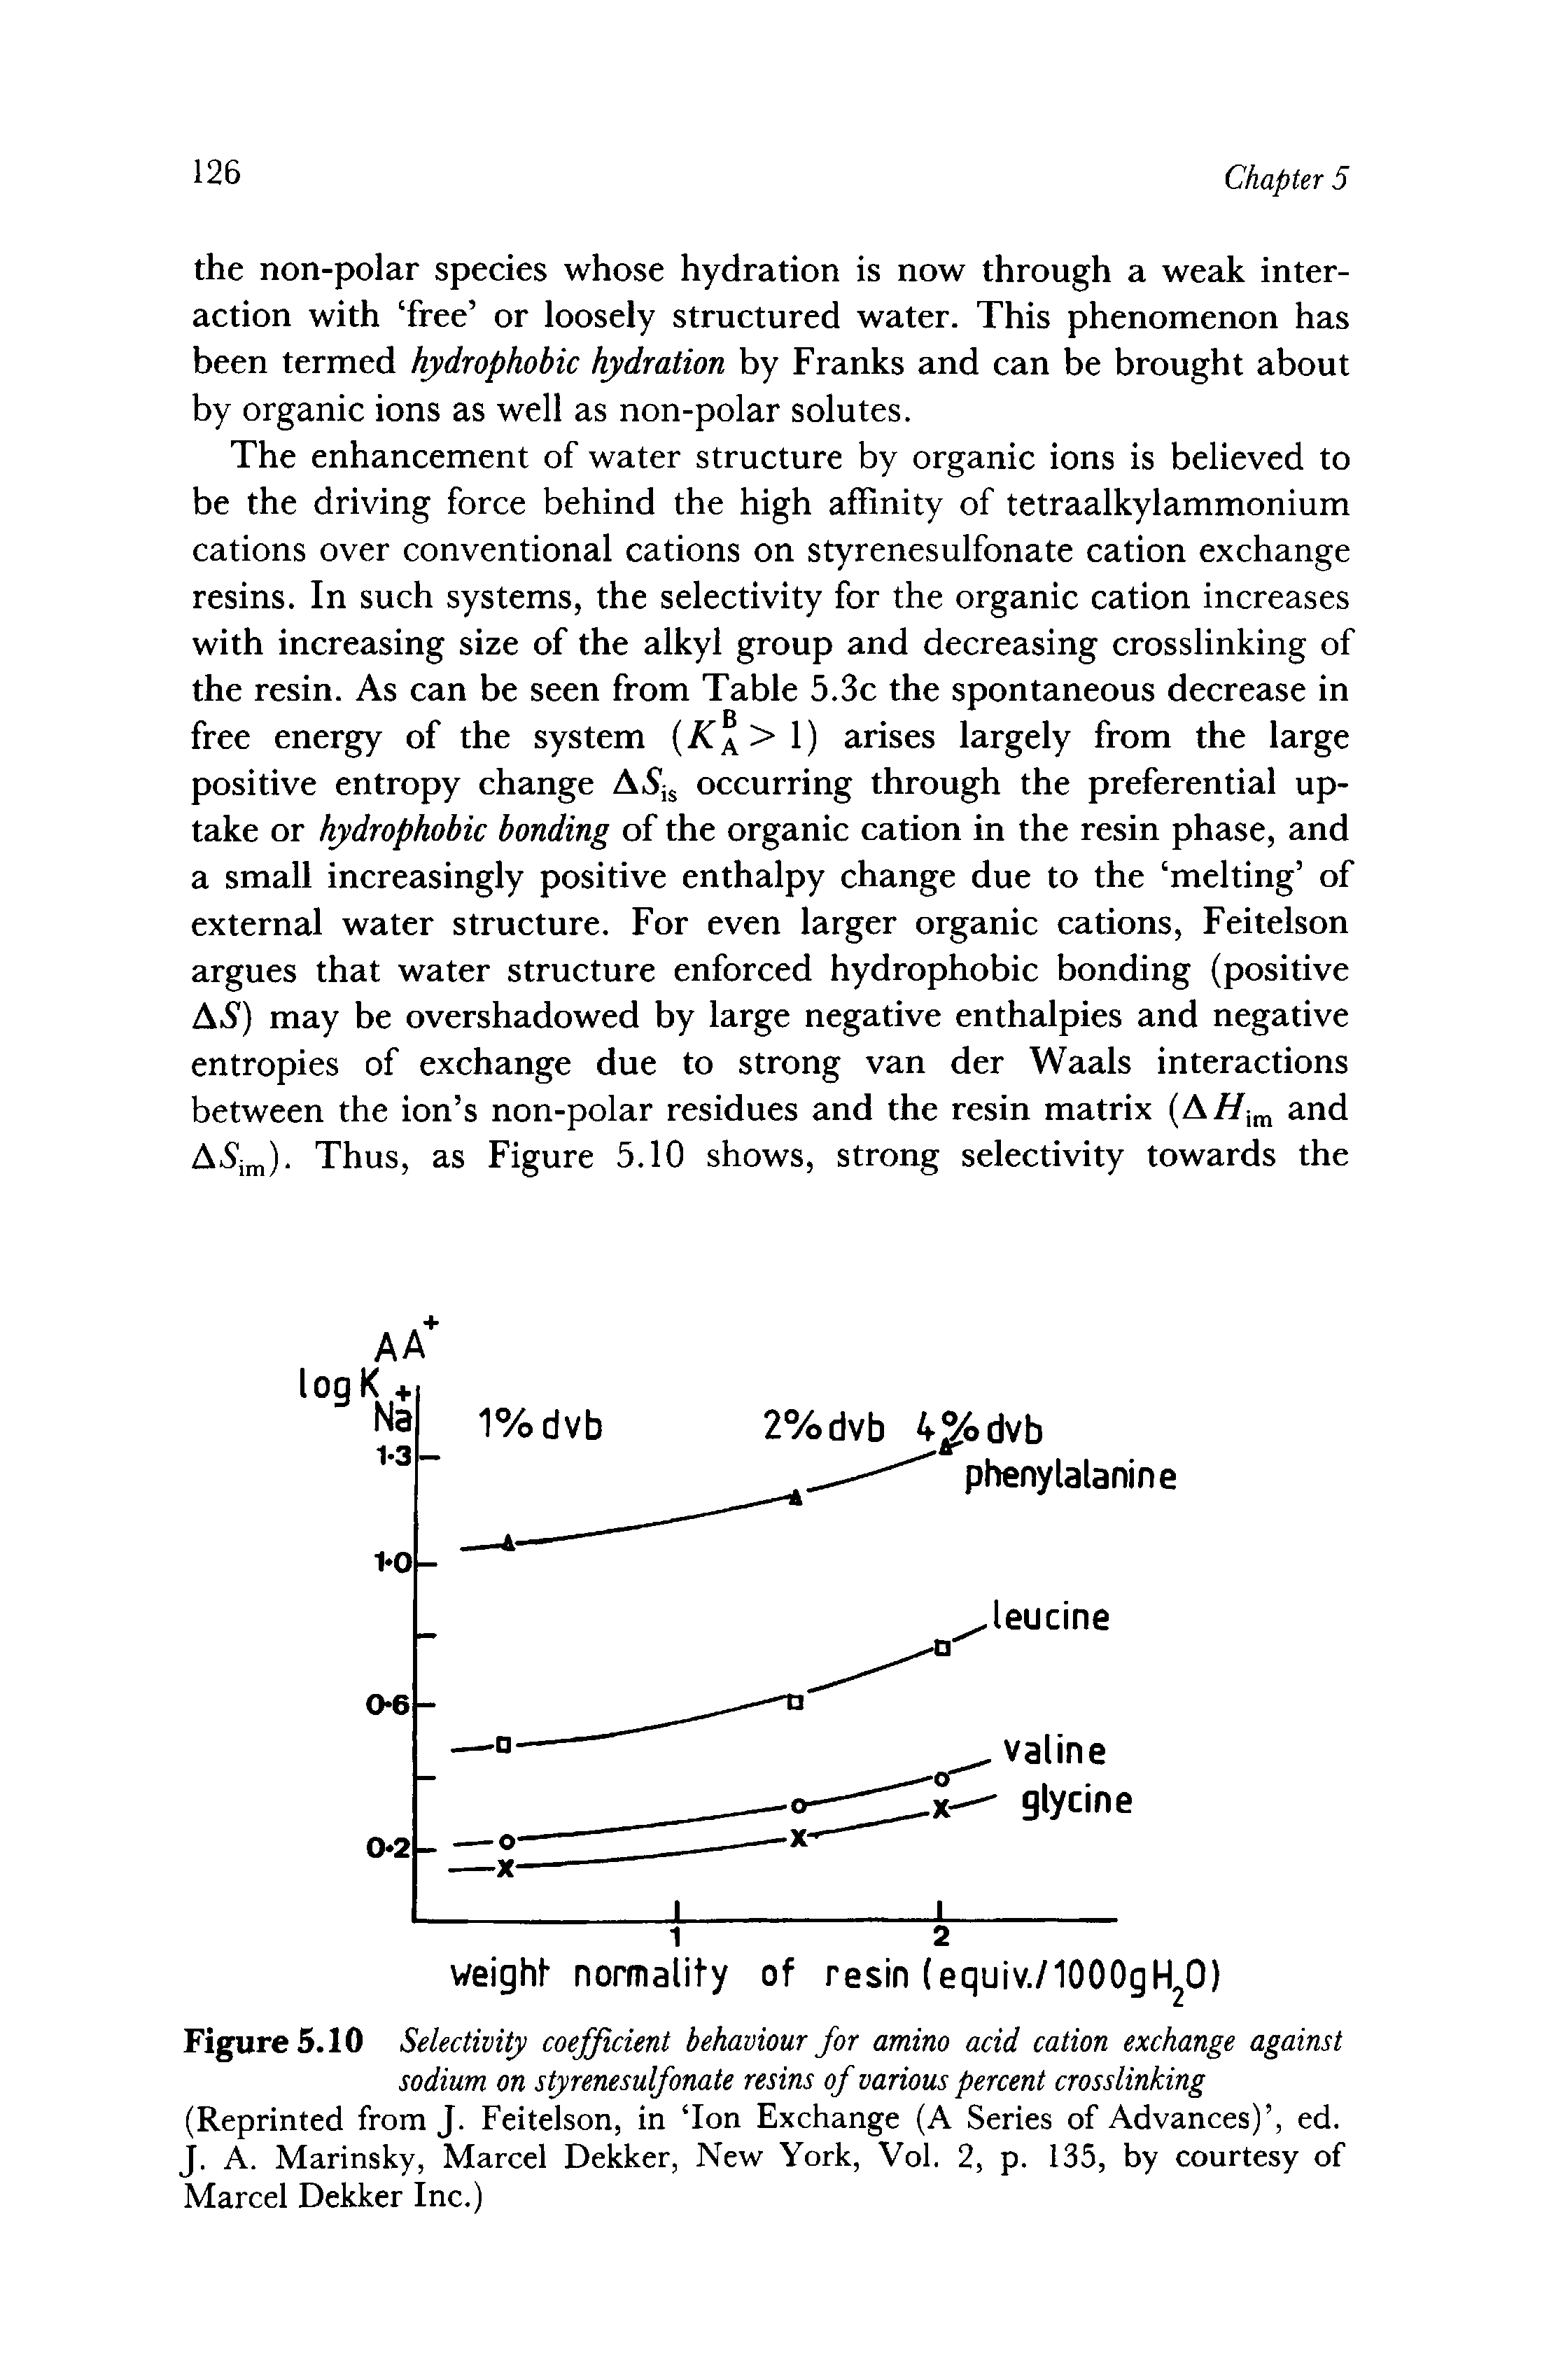 Figure 5.10 Selectivity coefficient behaviour for amino acid cation exchange against sodium on styrenesulfonate resins of various percent crosslinking (Reprinted from J. Feitelson, in Ion Exchange (A Series of Advances) , ed. J. A. Marinsky, Marcel Dekker, New York, Vol. 2, p. 135, by courtesy of Marcel Dekker Inc.)...